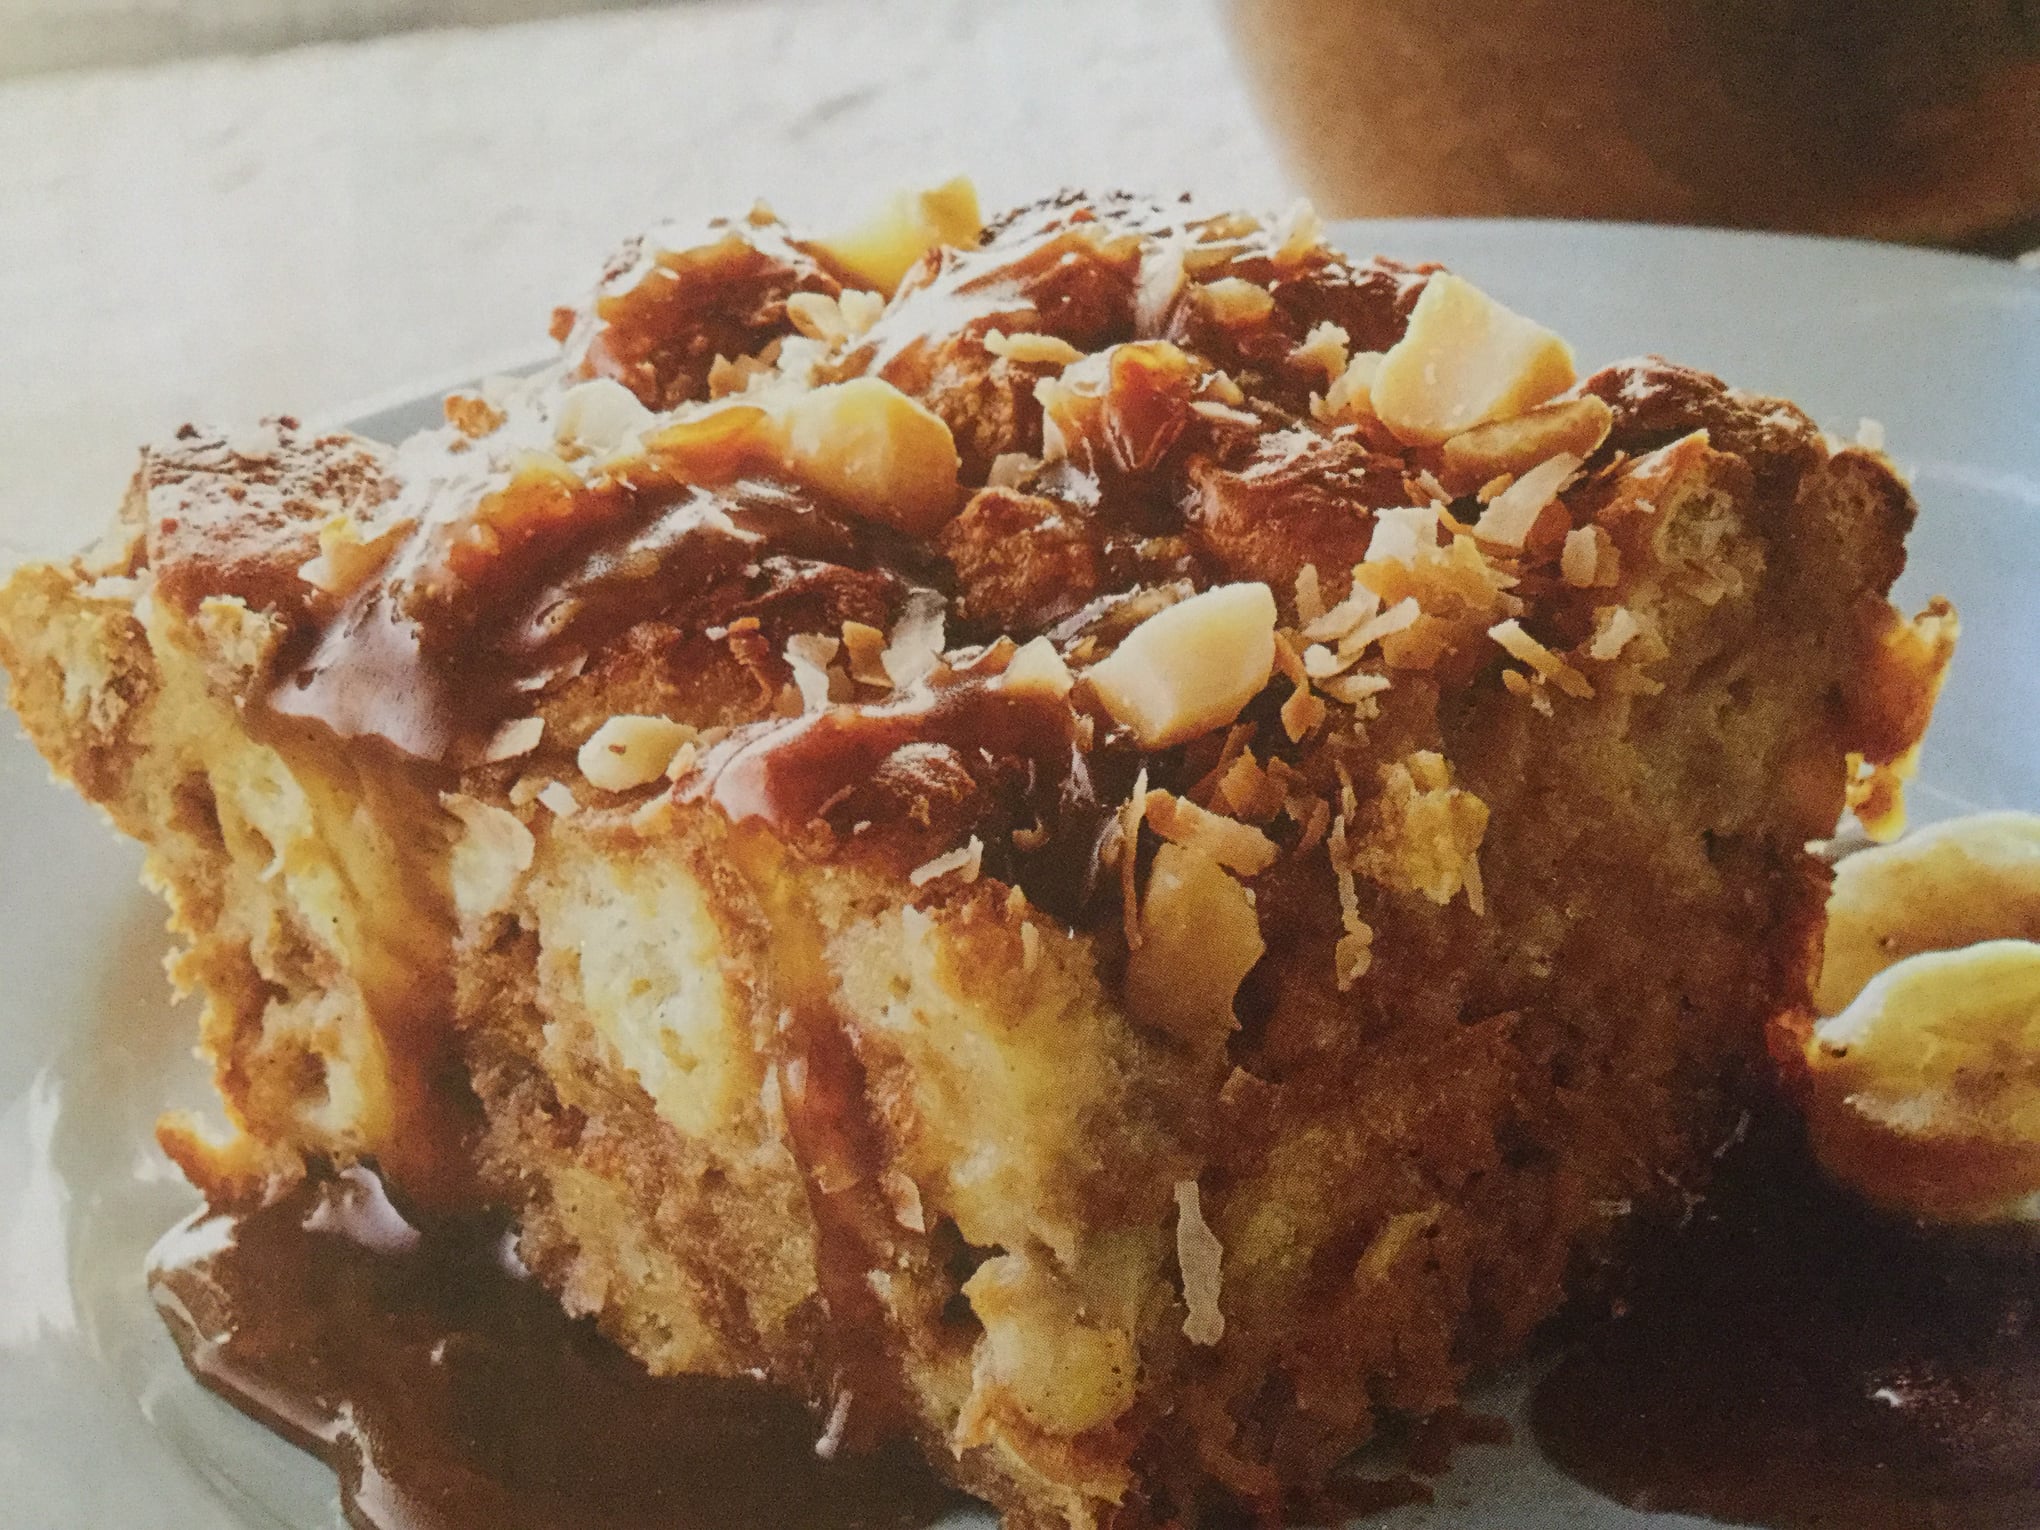 Tropical Coconut-Banana Bread Pudding with Caramel Sauce